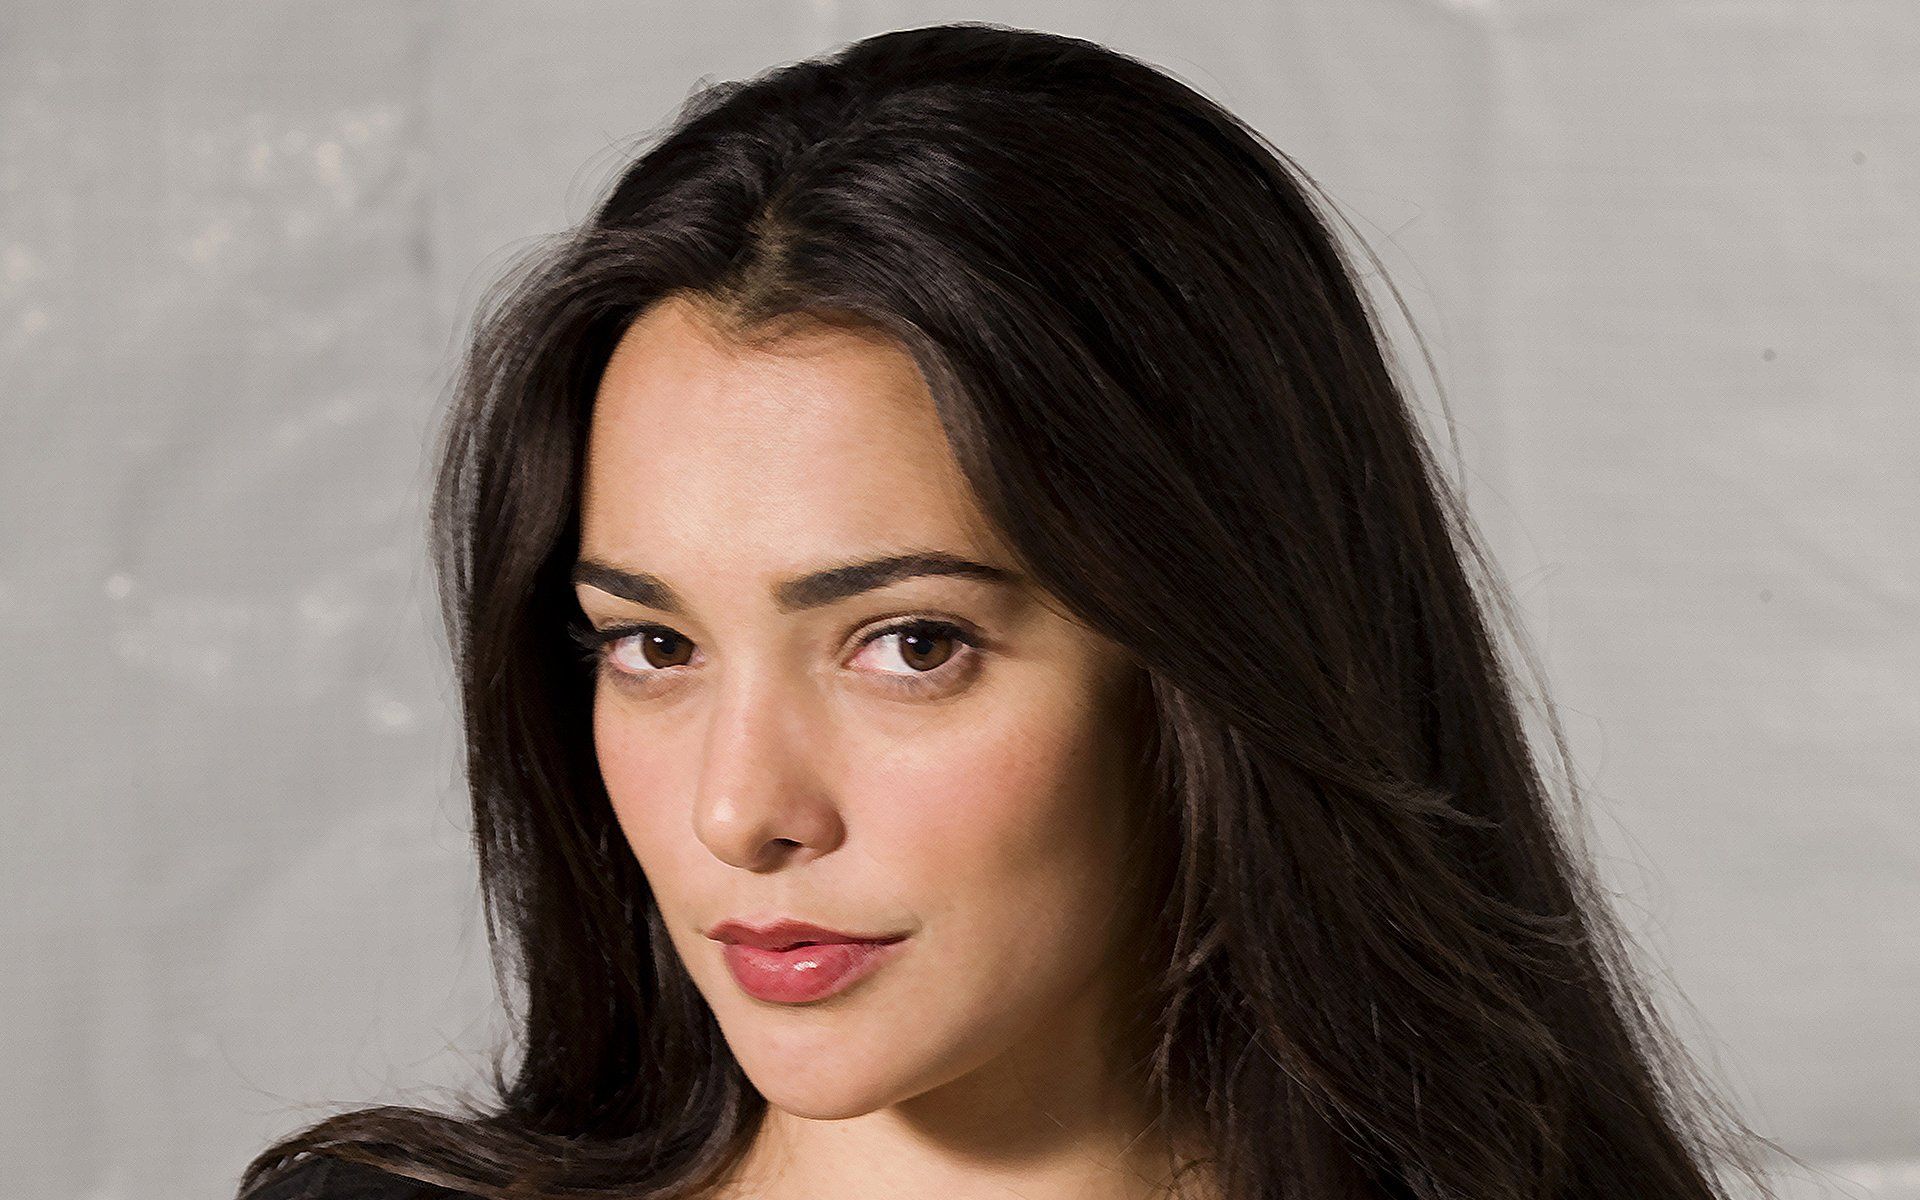 All About Natalie Martinez: Height, Weight, Bio, and More